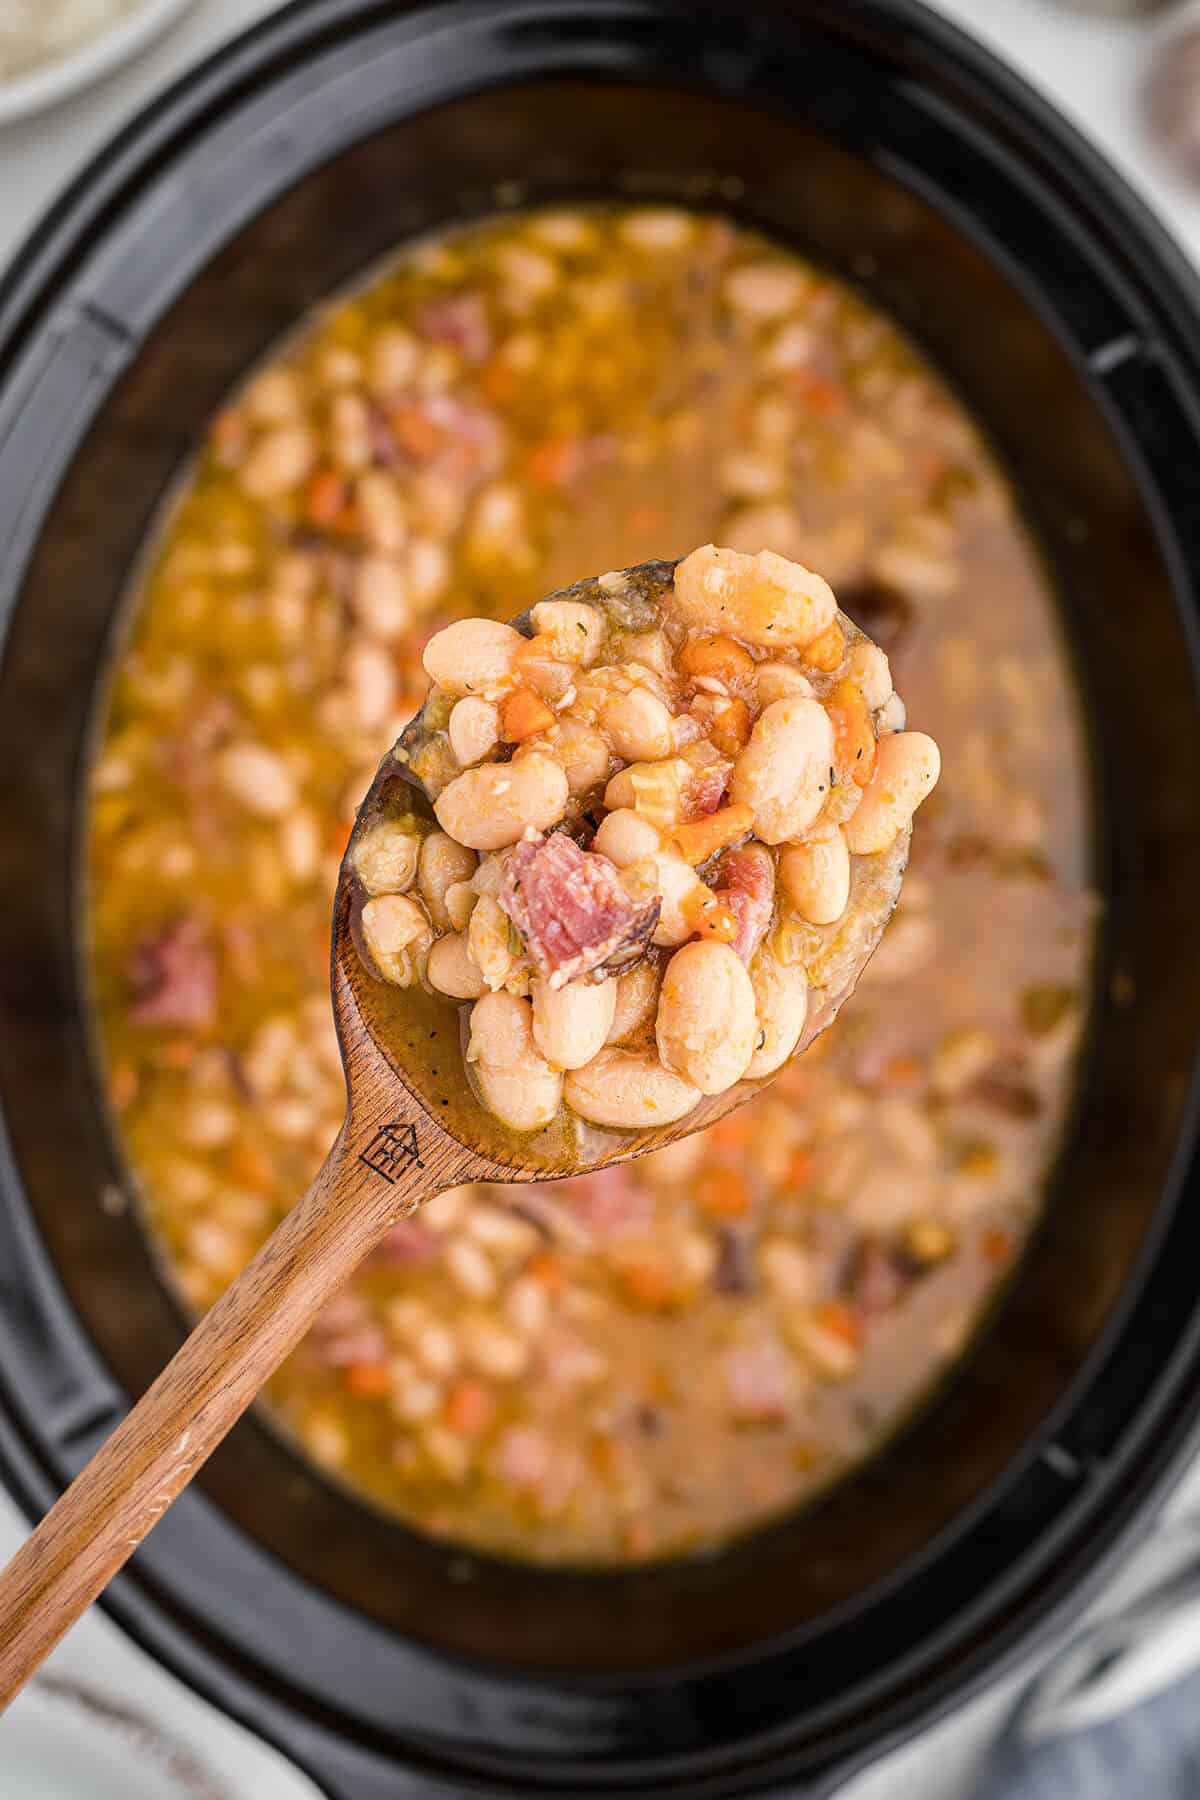 A spoonful of white beans held over a slow cooker.